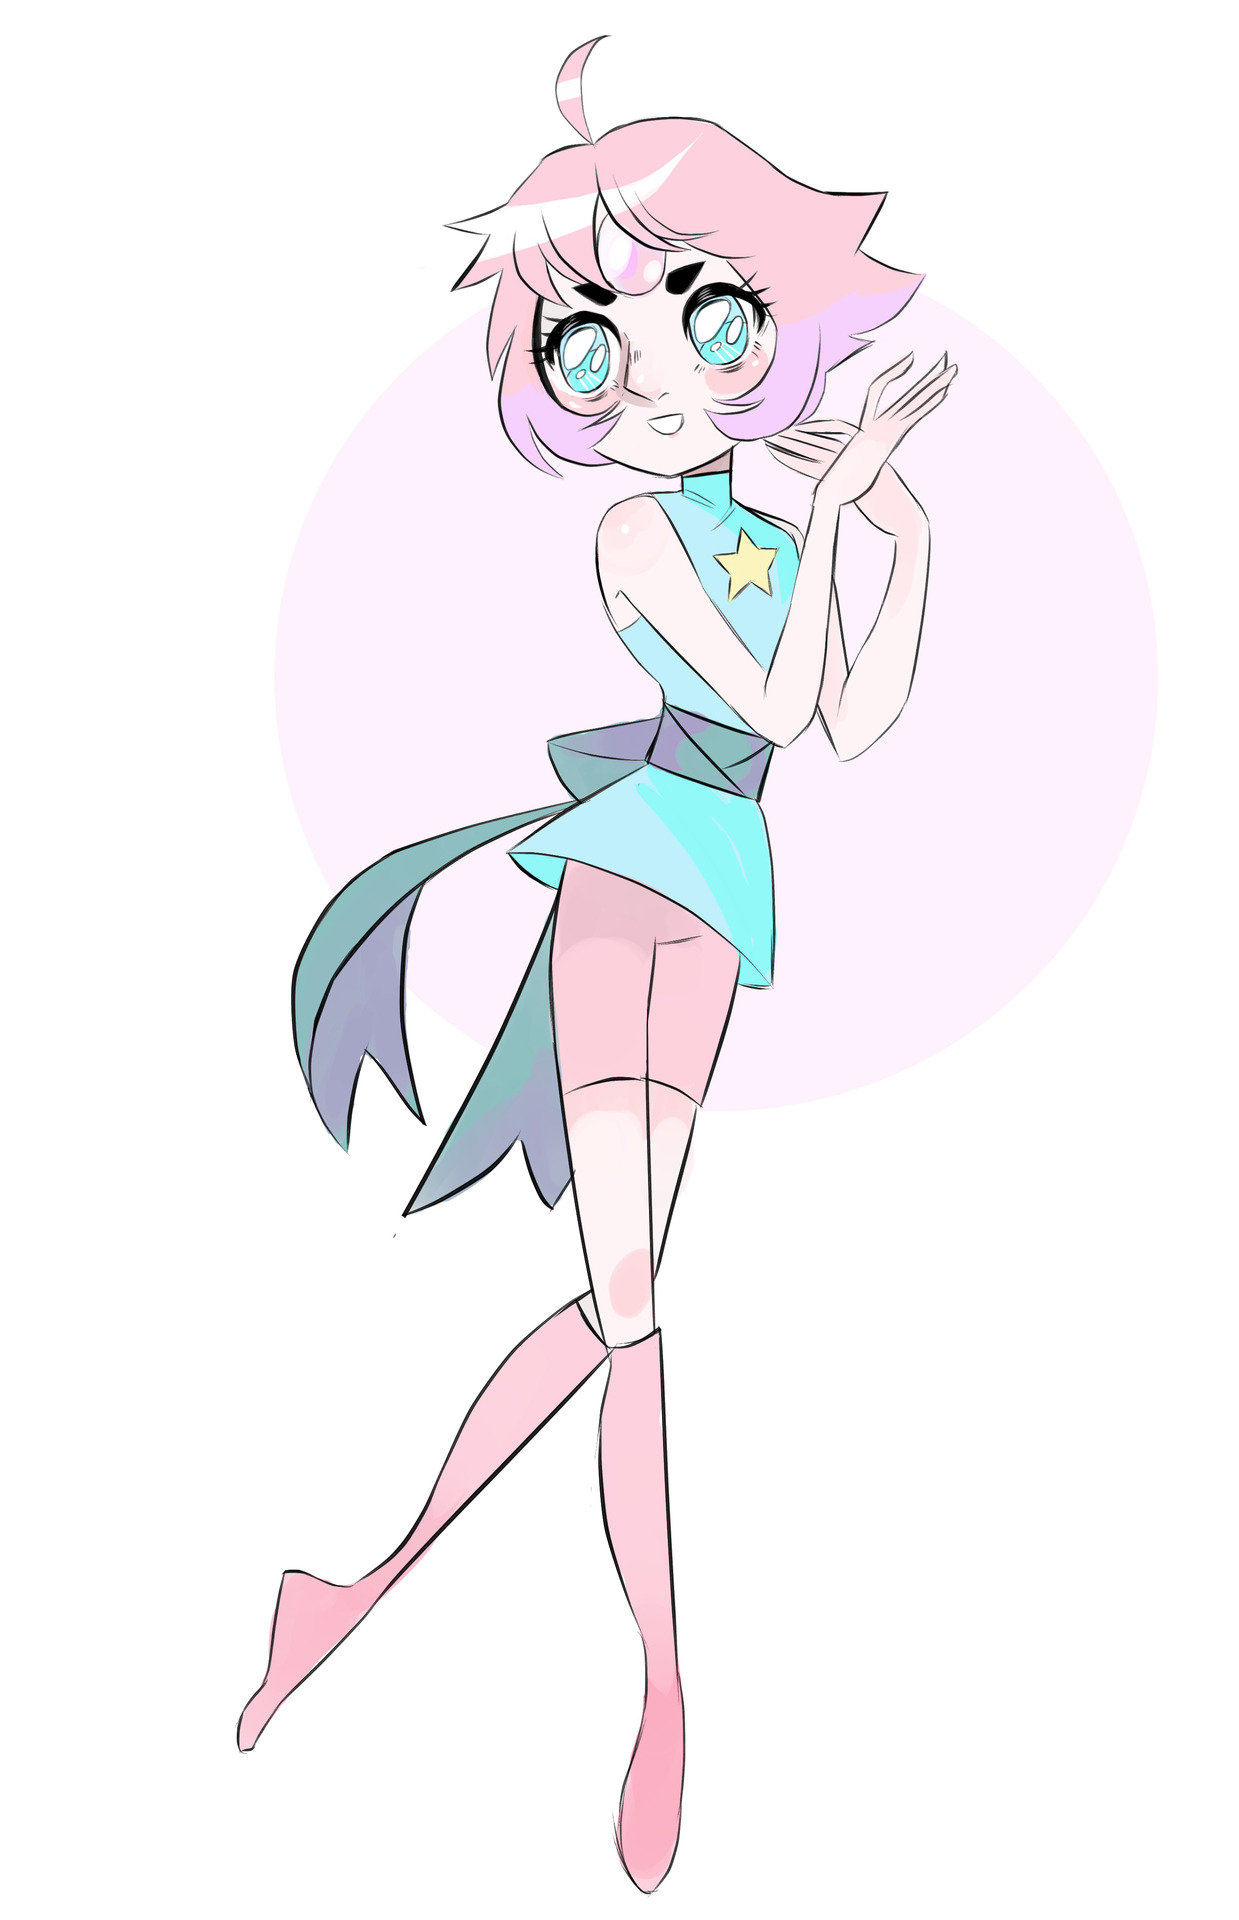 lil pearl sketch bc i love her a lot